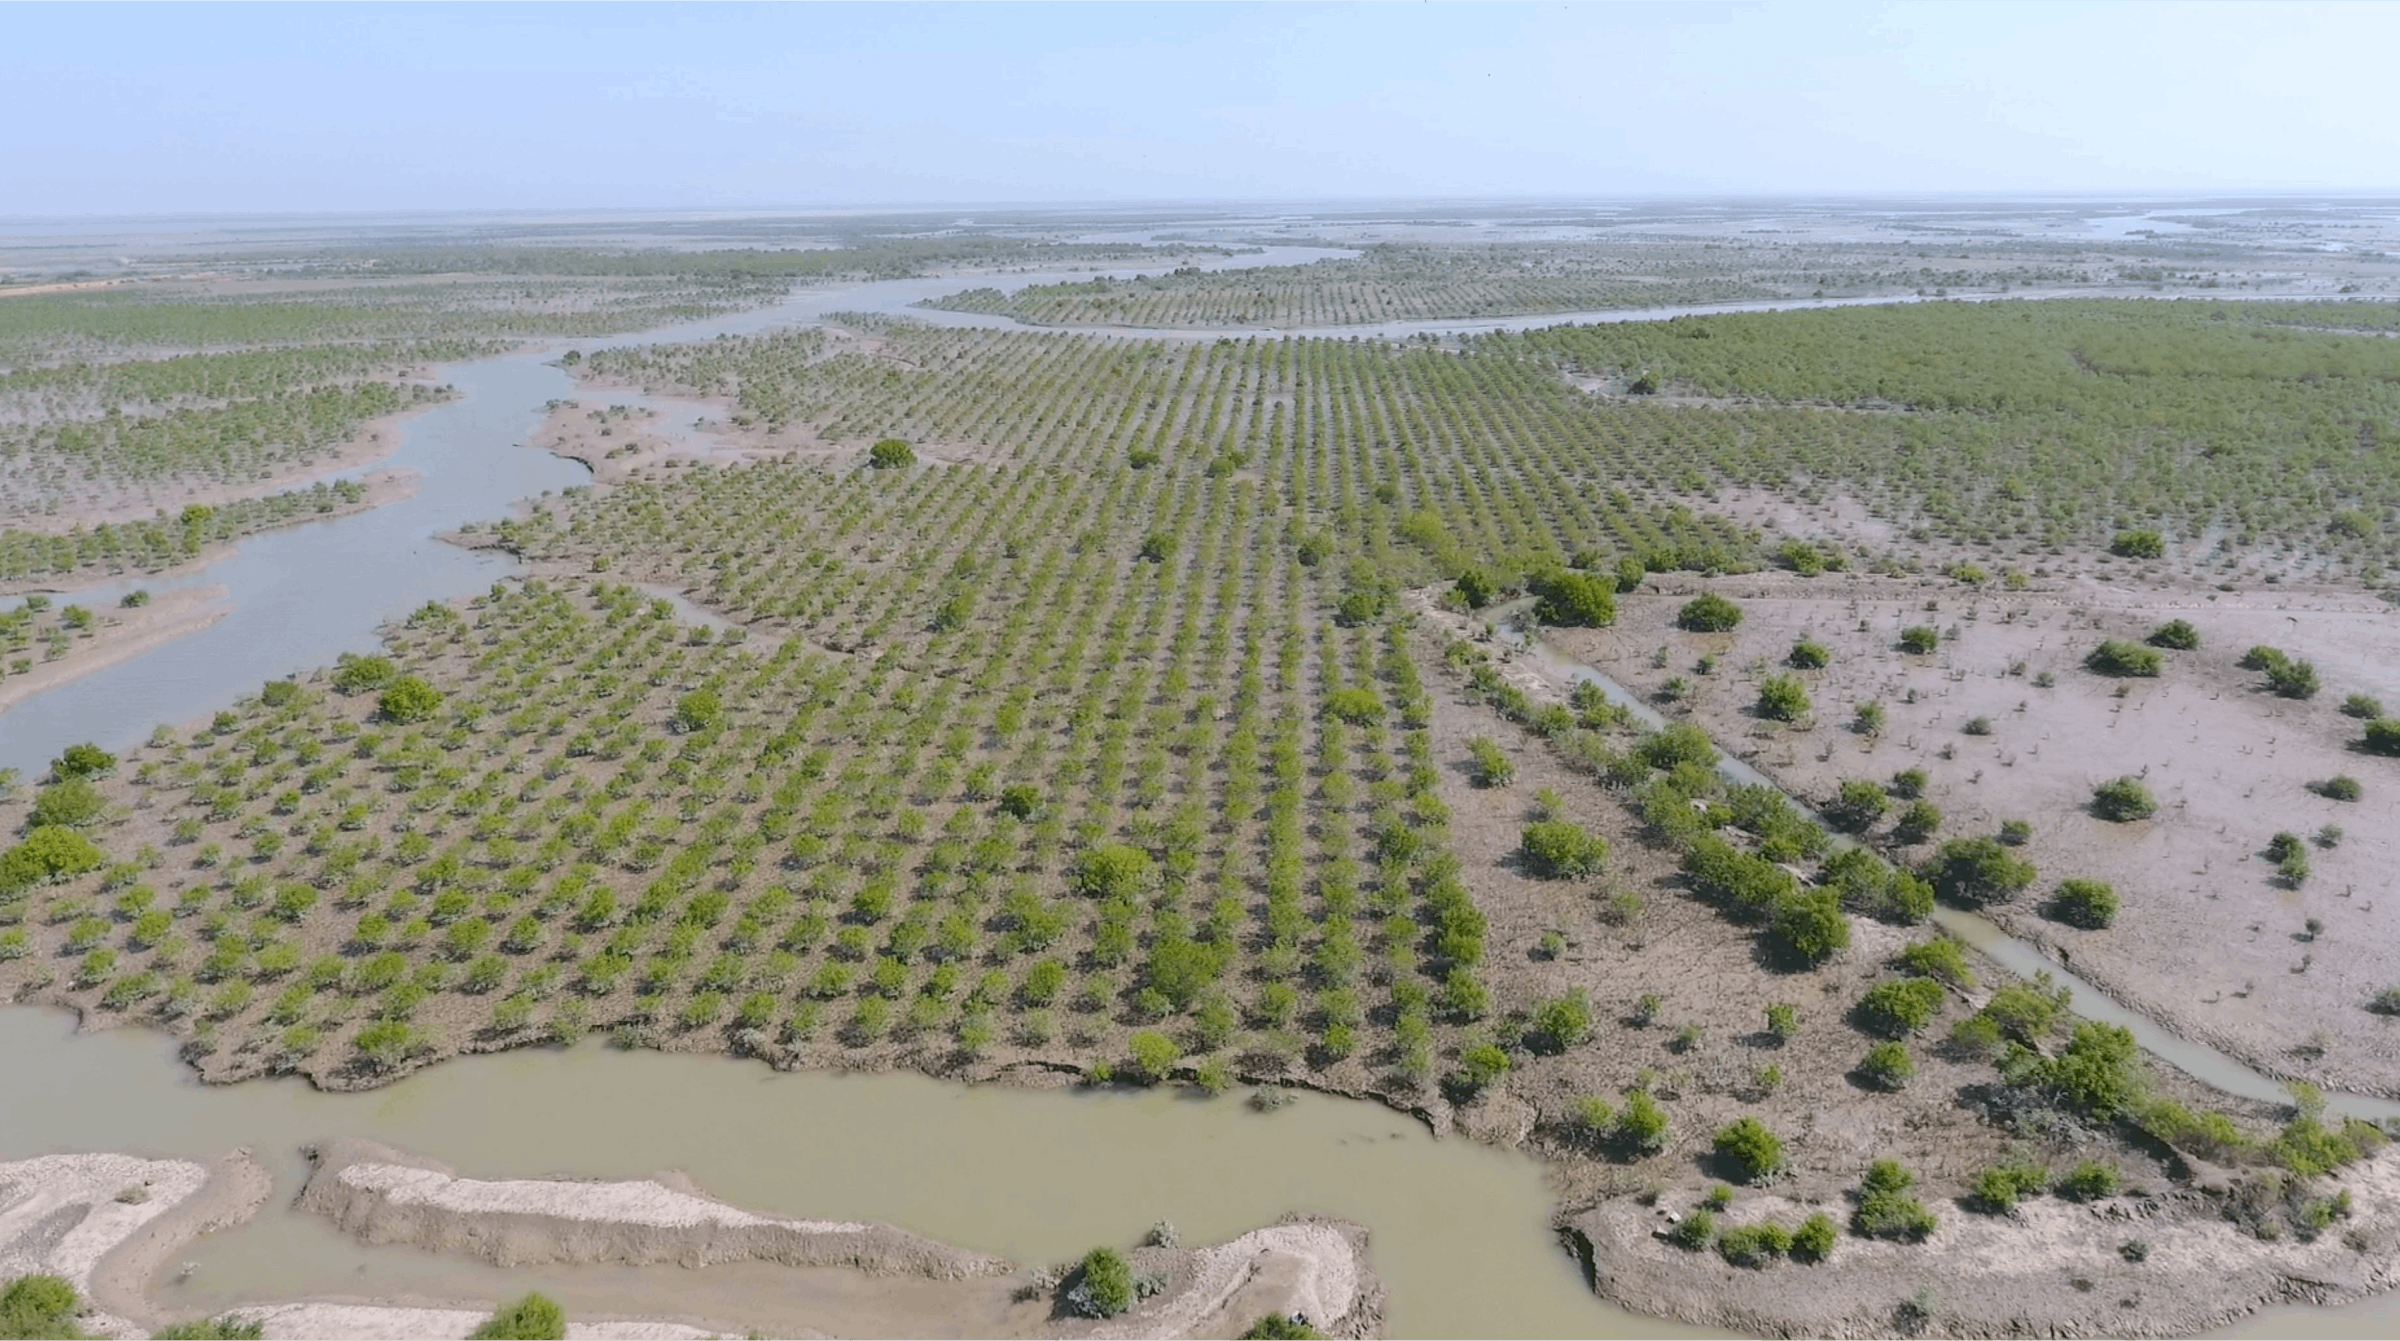 Photo showing the Mangroves in the Indus Delta. Credit: Delta Blue Carbon